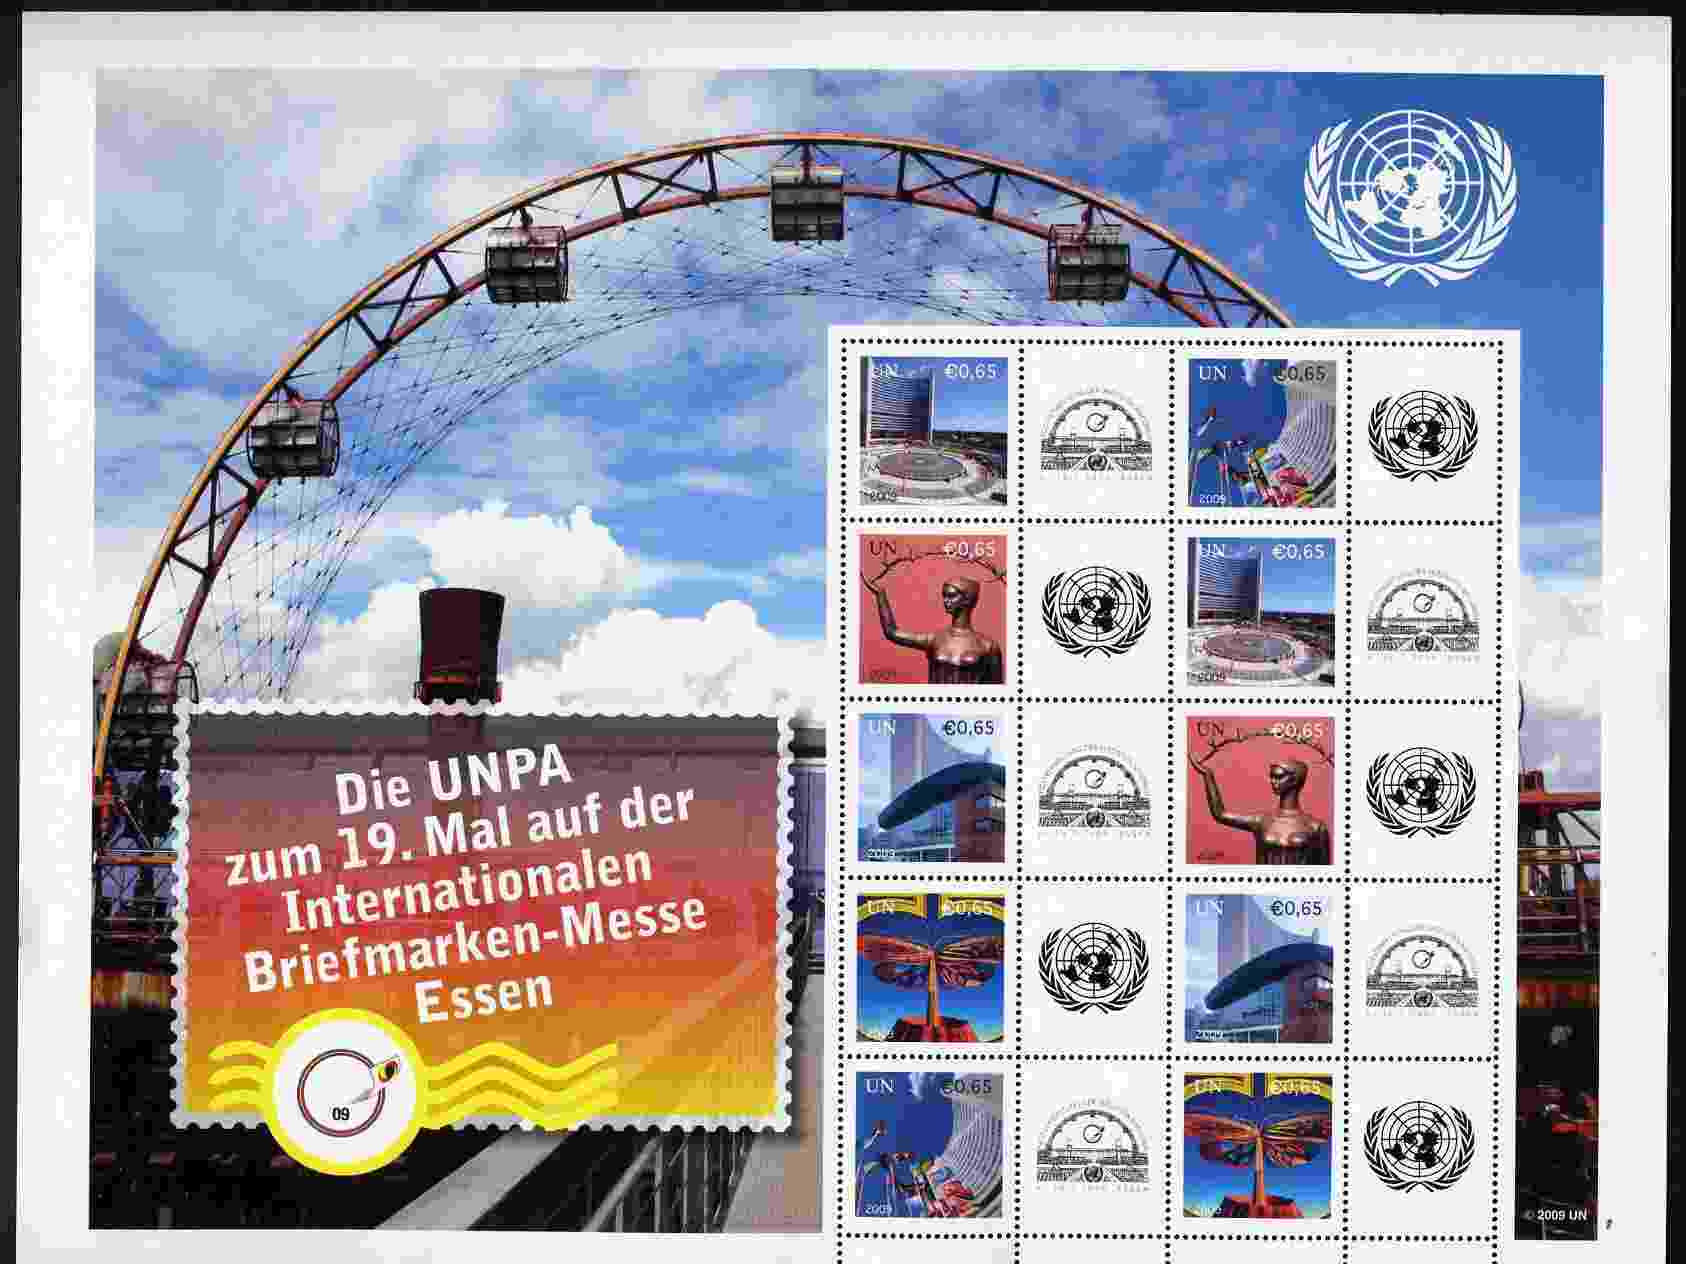 http://unstamps.un.org/images/products/prod_pss/pss_2009may_vic_zm.jpg